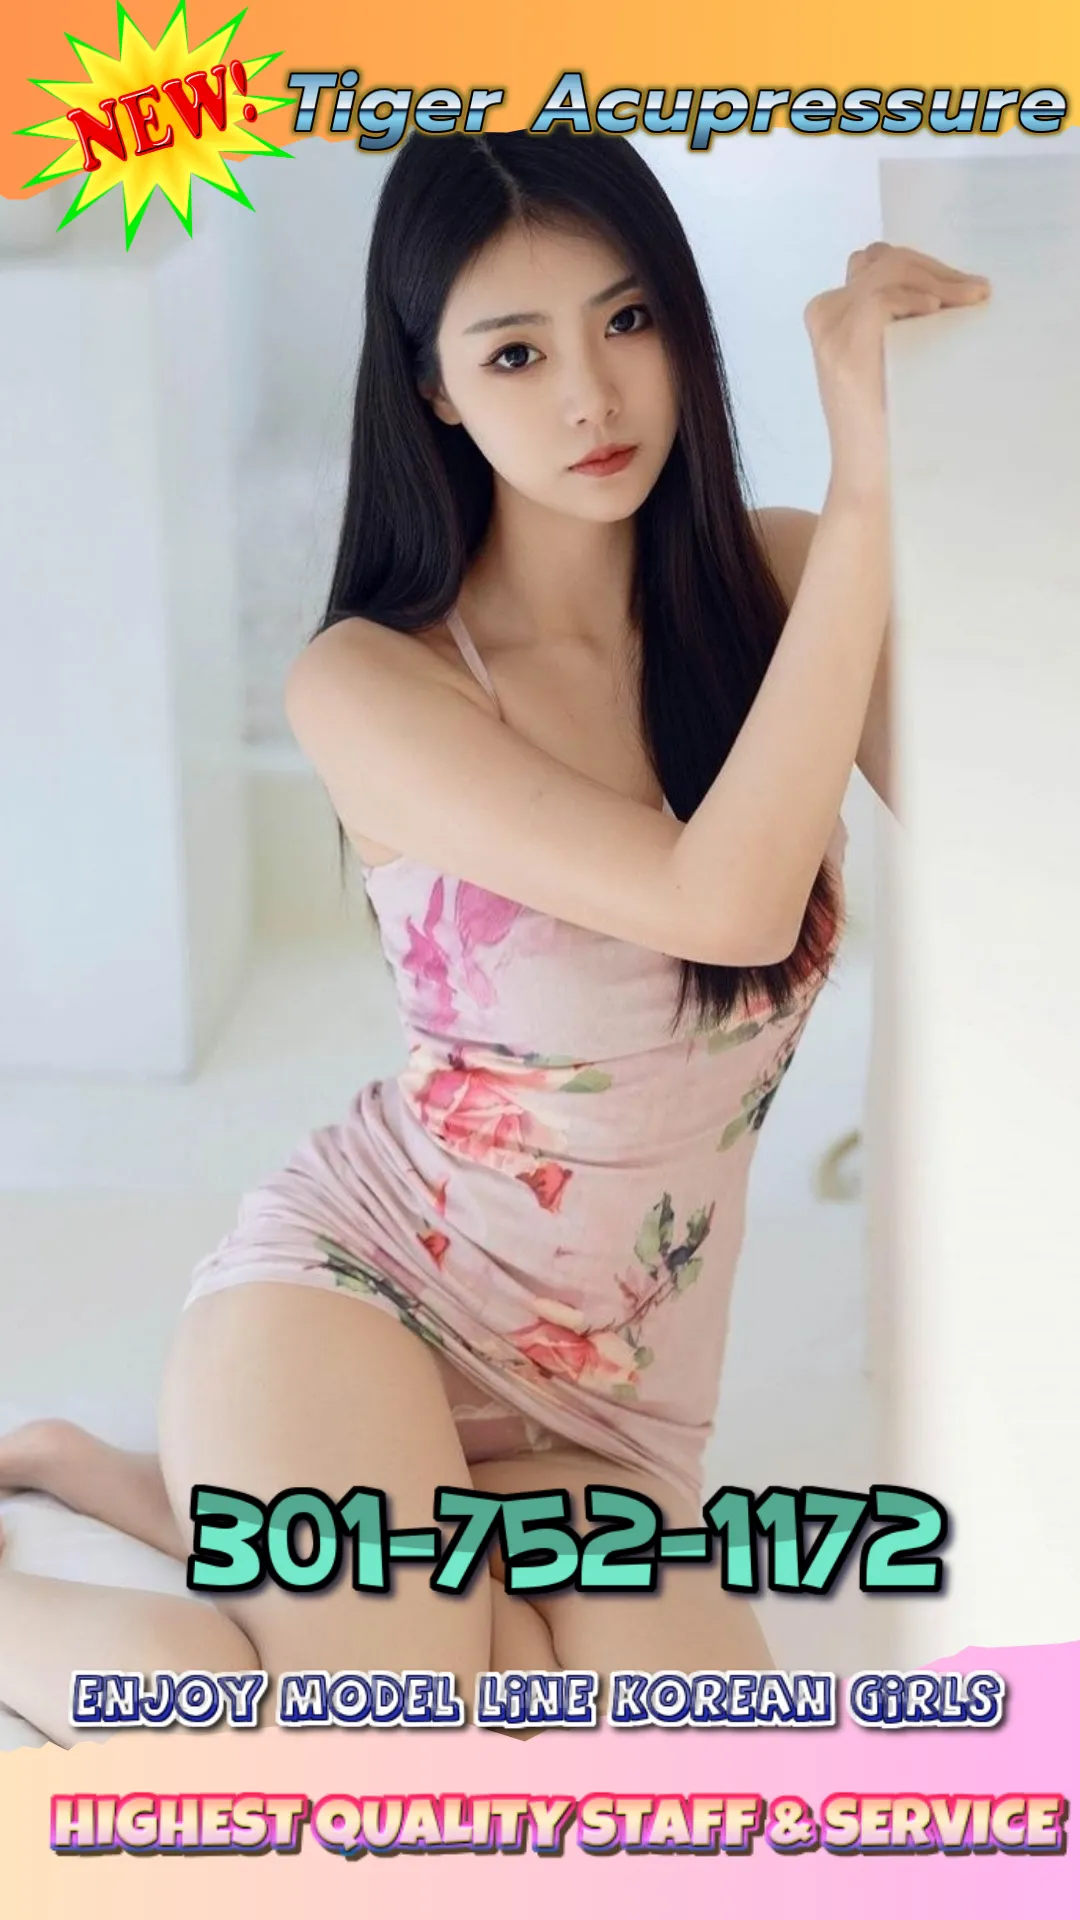 Reviews about escort with phone number 3017521172